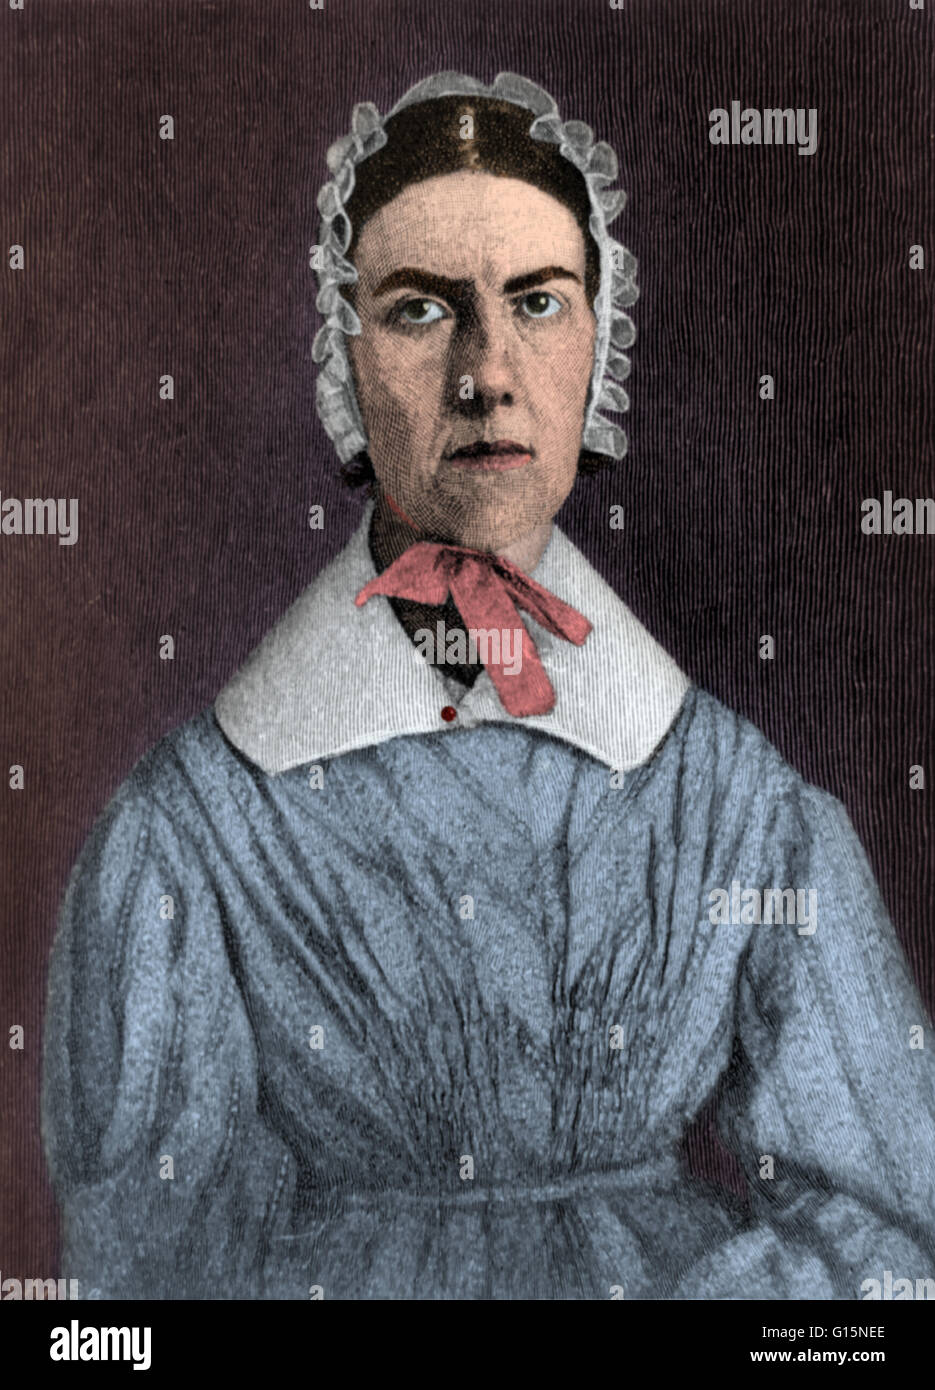 Color-enhanced portrait of Angelina Emily Grimke Weld (February 20, 1805 - October 26, 1879), an American political activist, abolitionist and supporter of the women's suffrage movement. Nicknamed 'Nina,' young Angelina was very close to her older sister Stock Photo